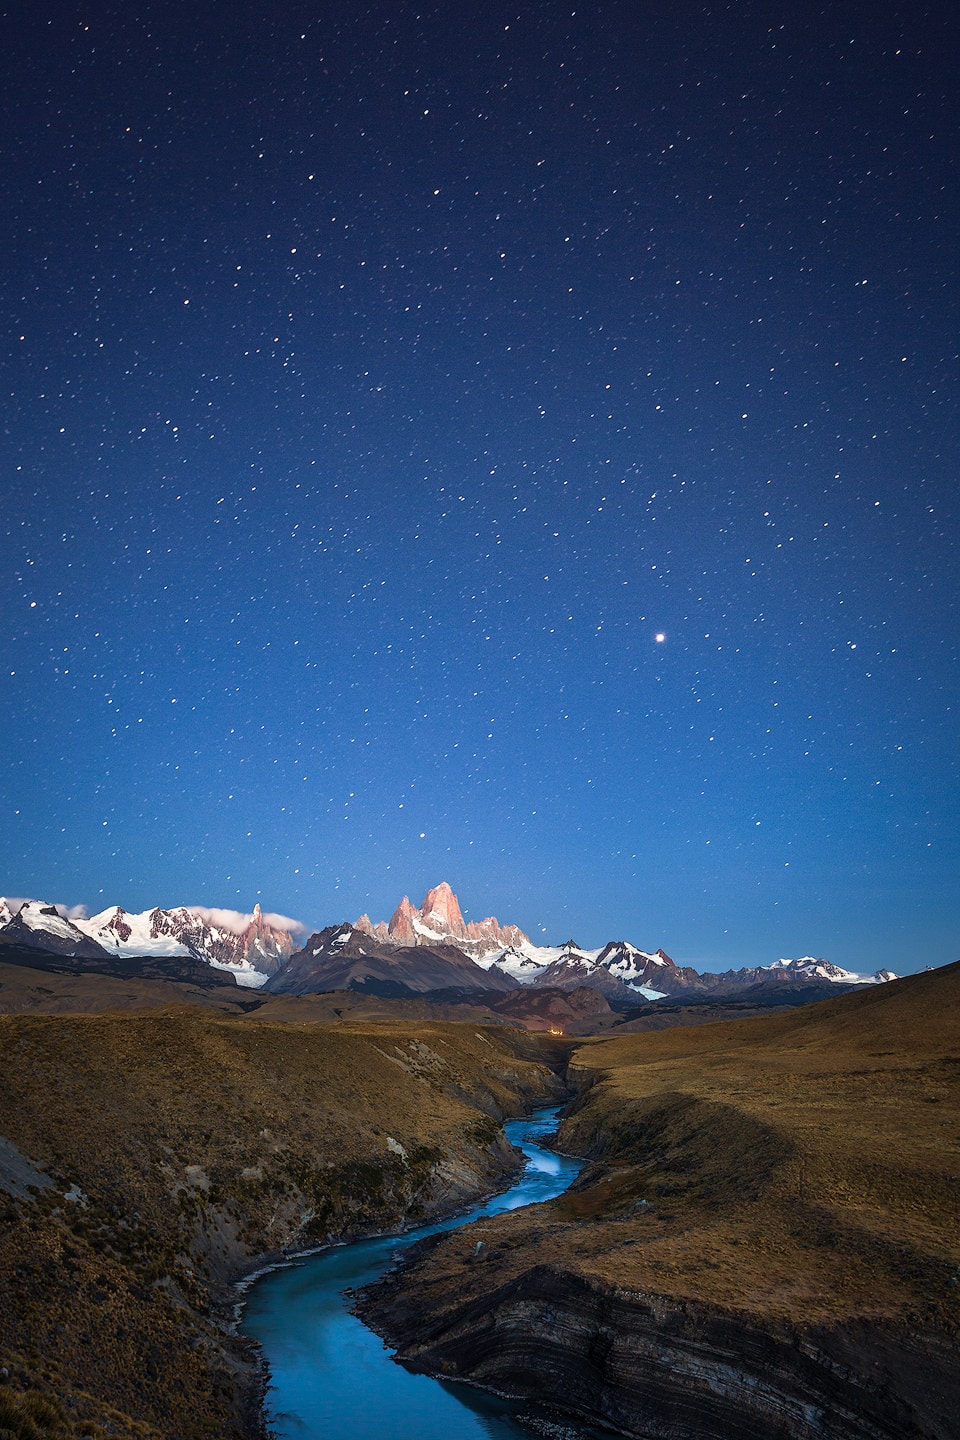 Cerro Torre and Fitz Roy at night